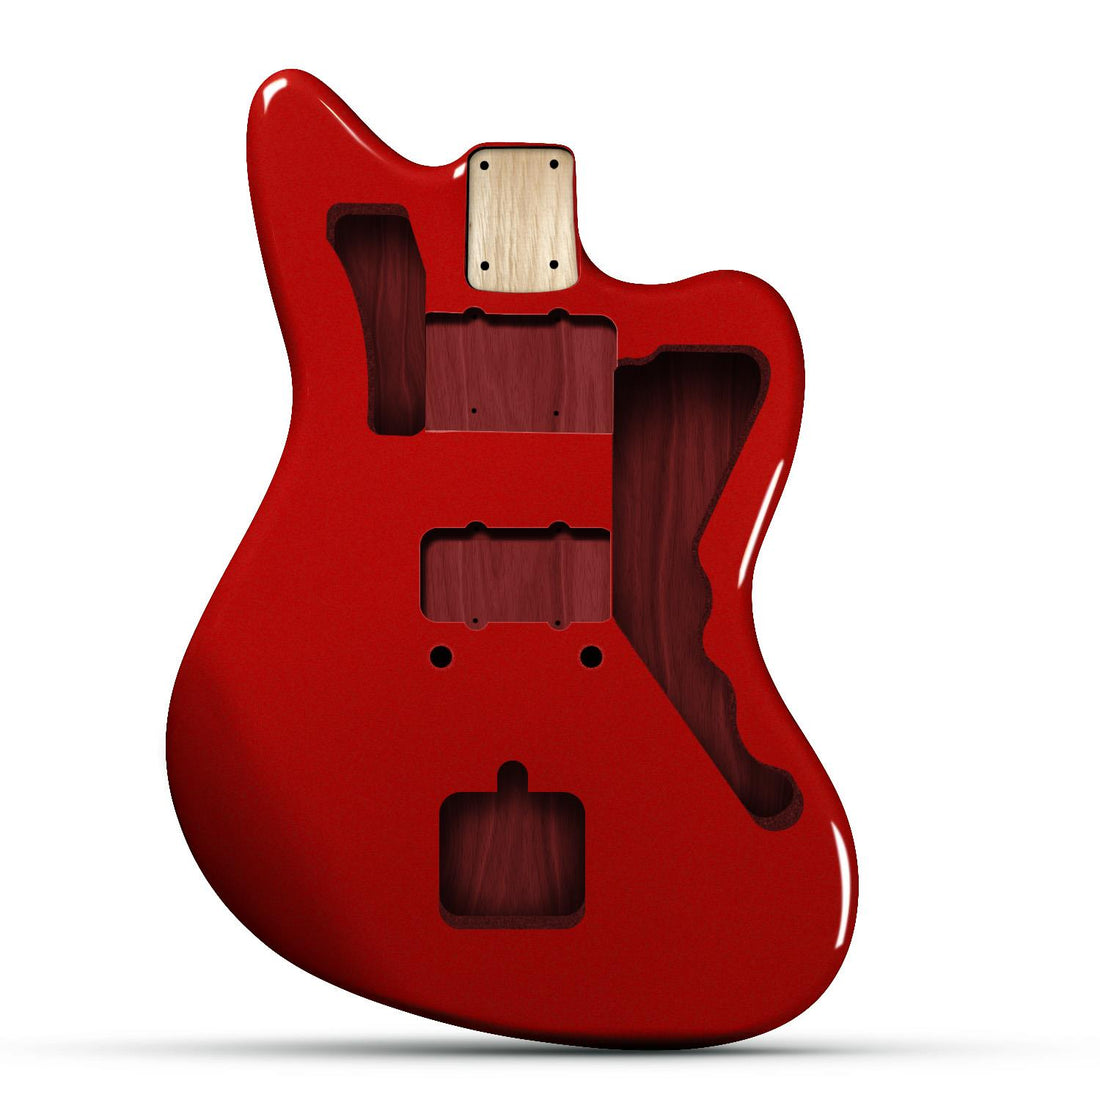 Candy Apple Red Nitrocellulose Guitar Paint Kit Northwest Guitars